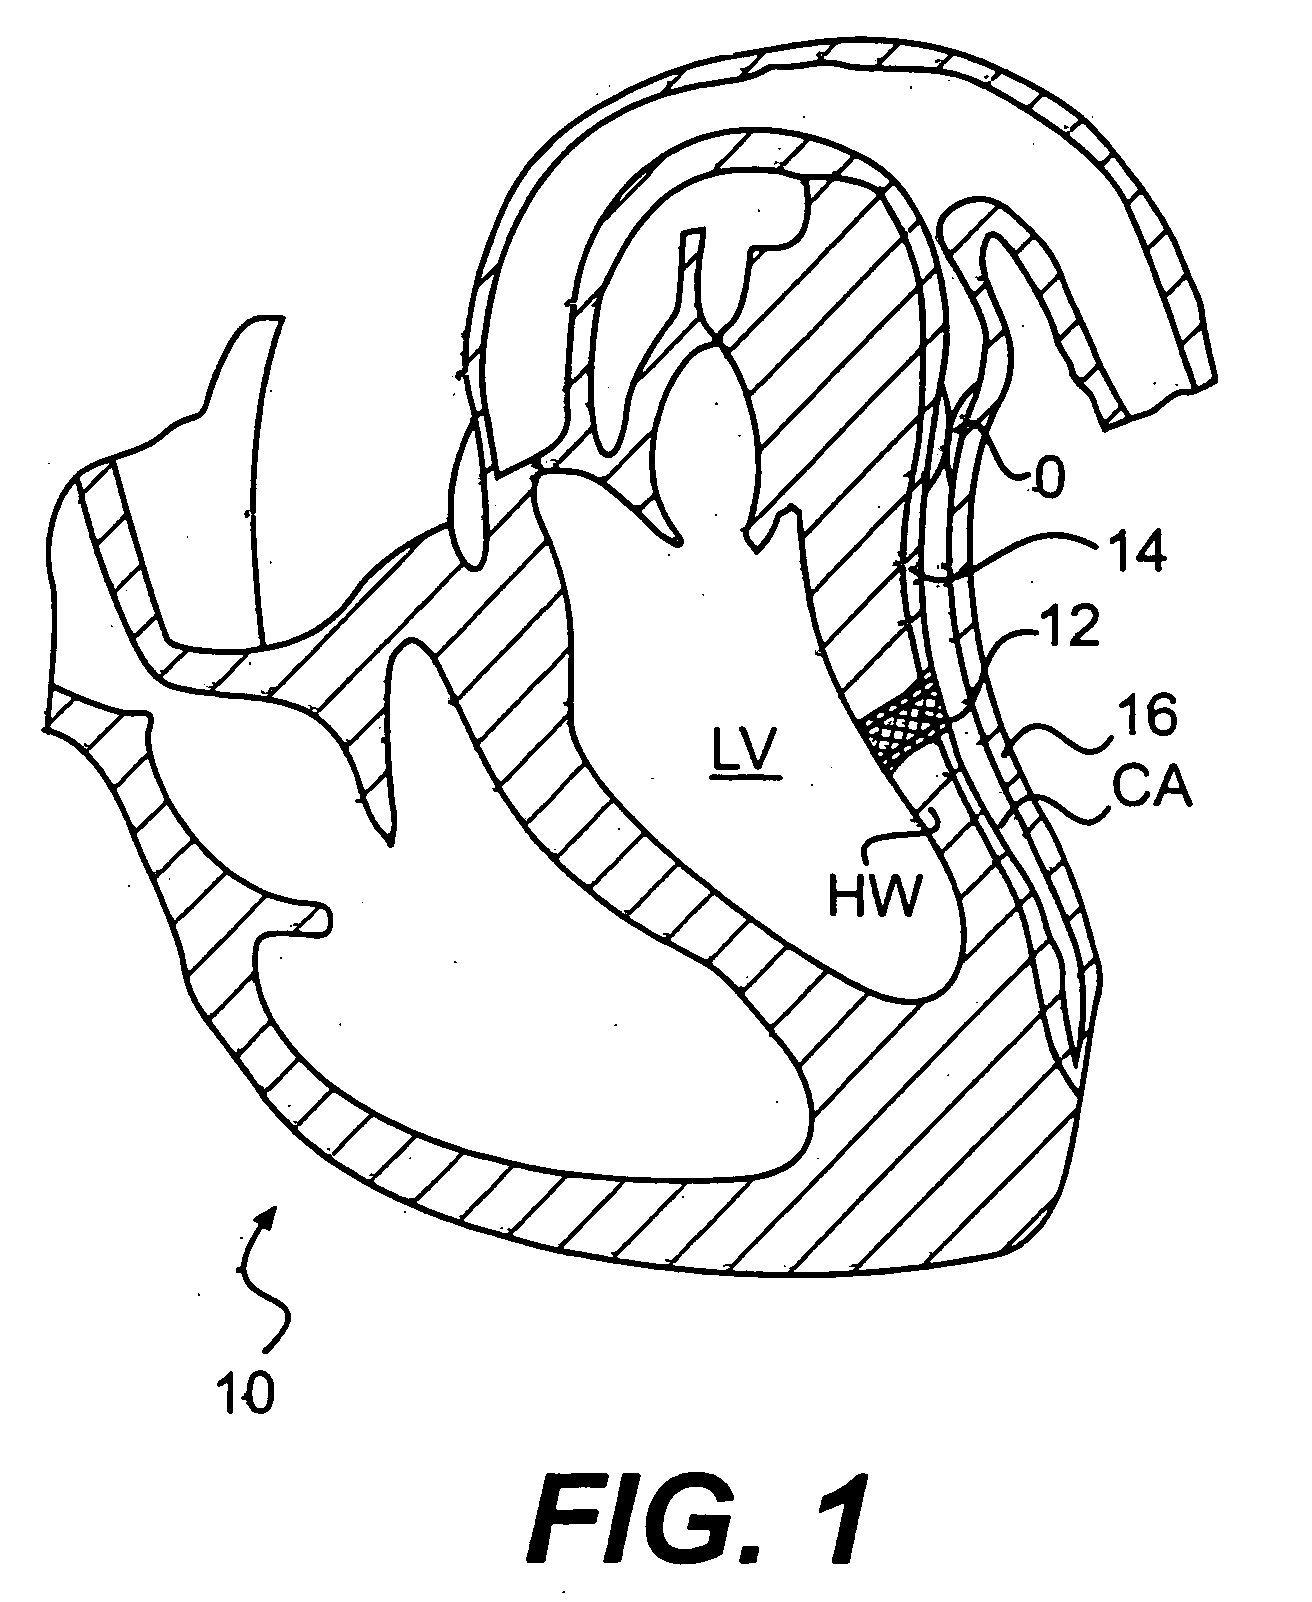 Methods and devices for delivering a ventricular stent